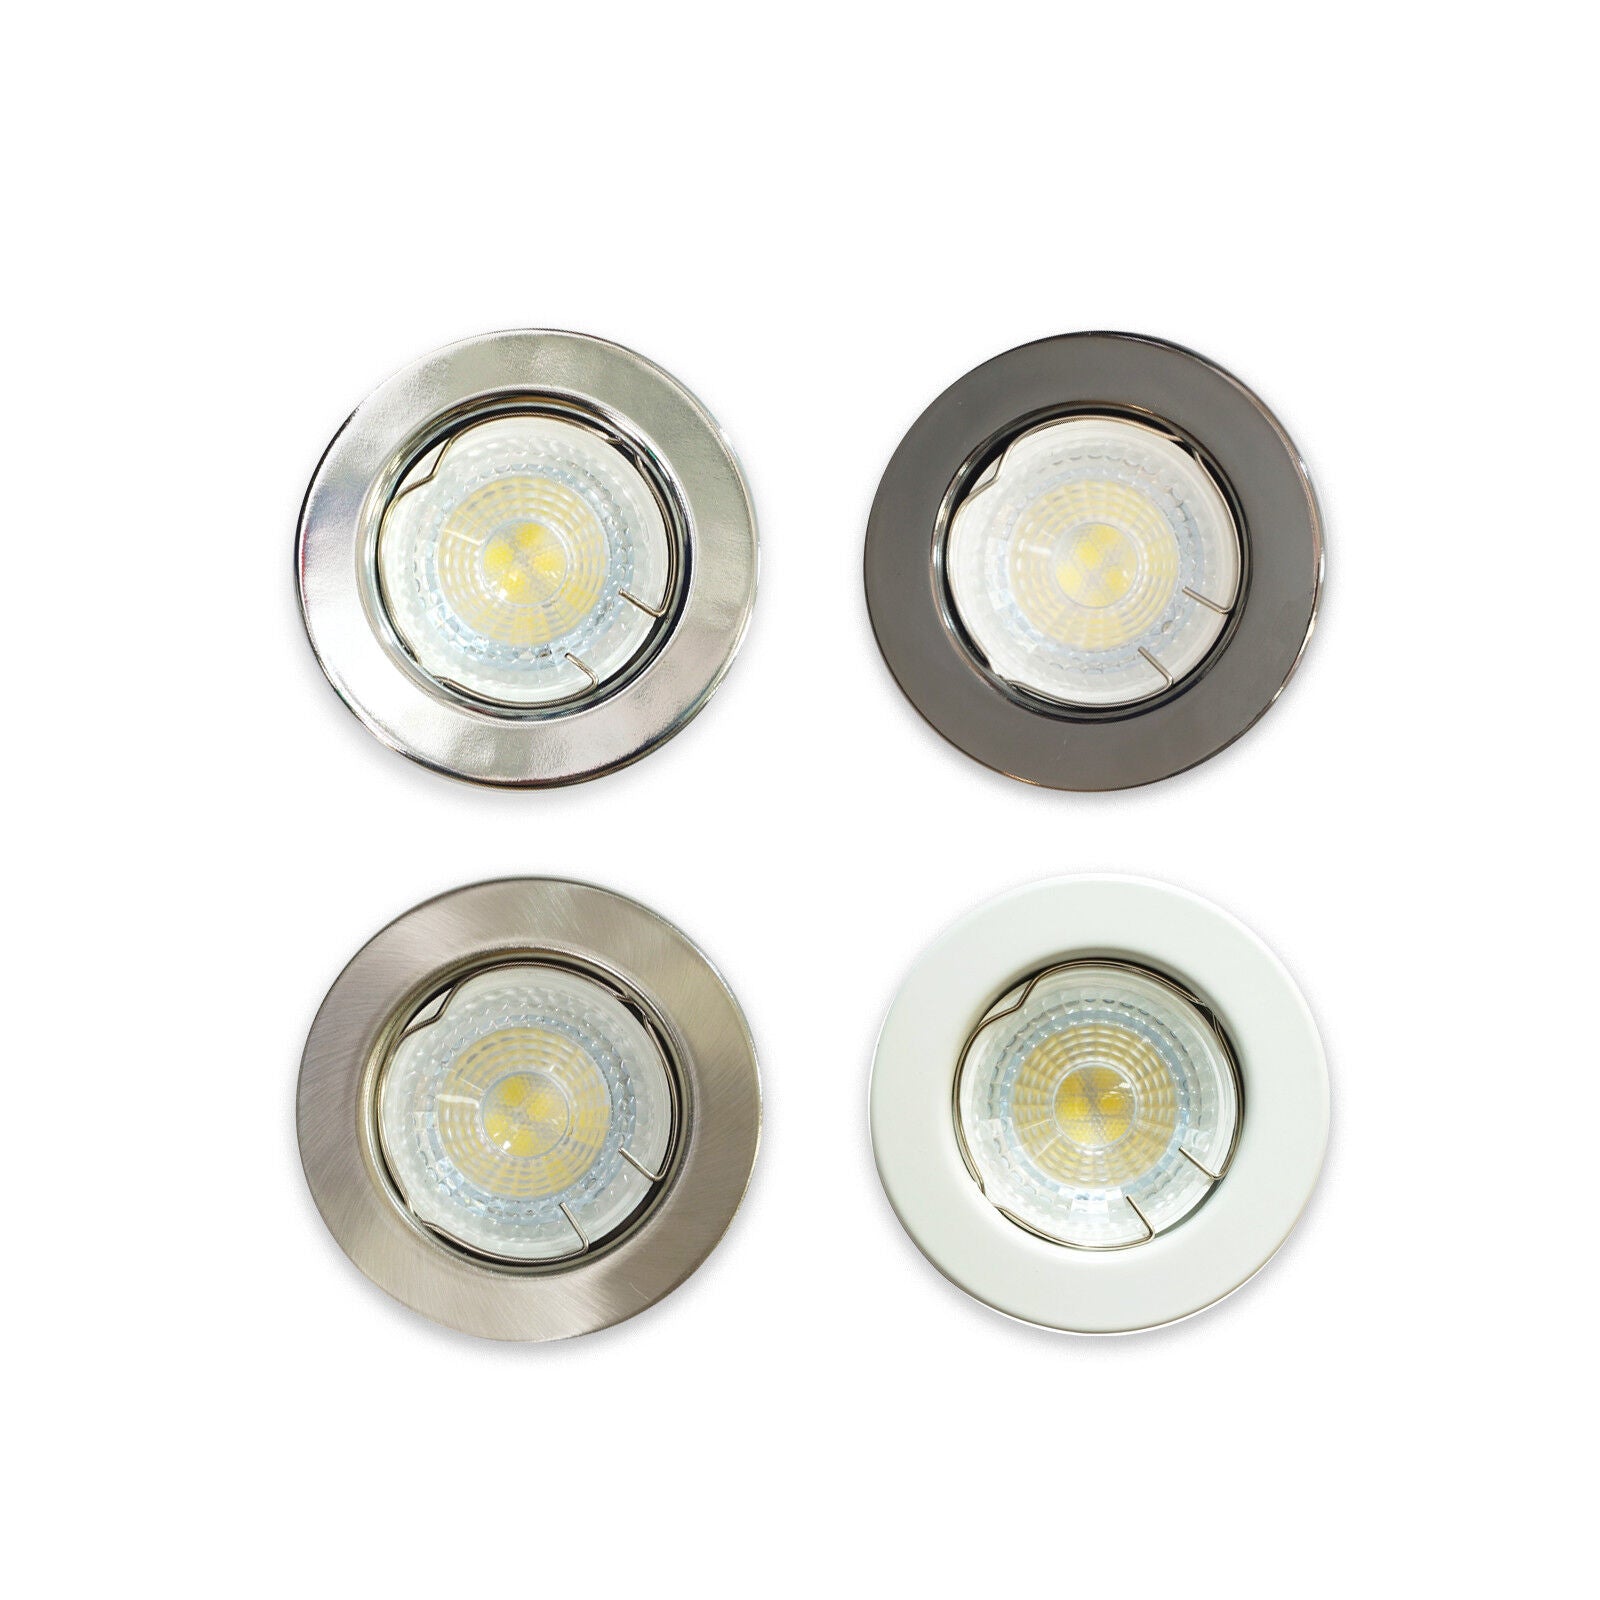 Recessed Ceiling Spot Light Dimmable Fixed Mains GU10 LED Downlight Fitting - Light fixtures UK